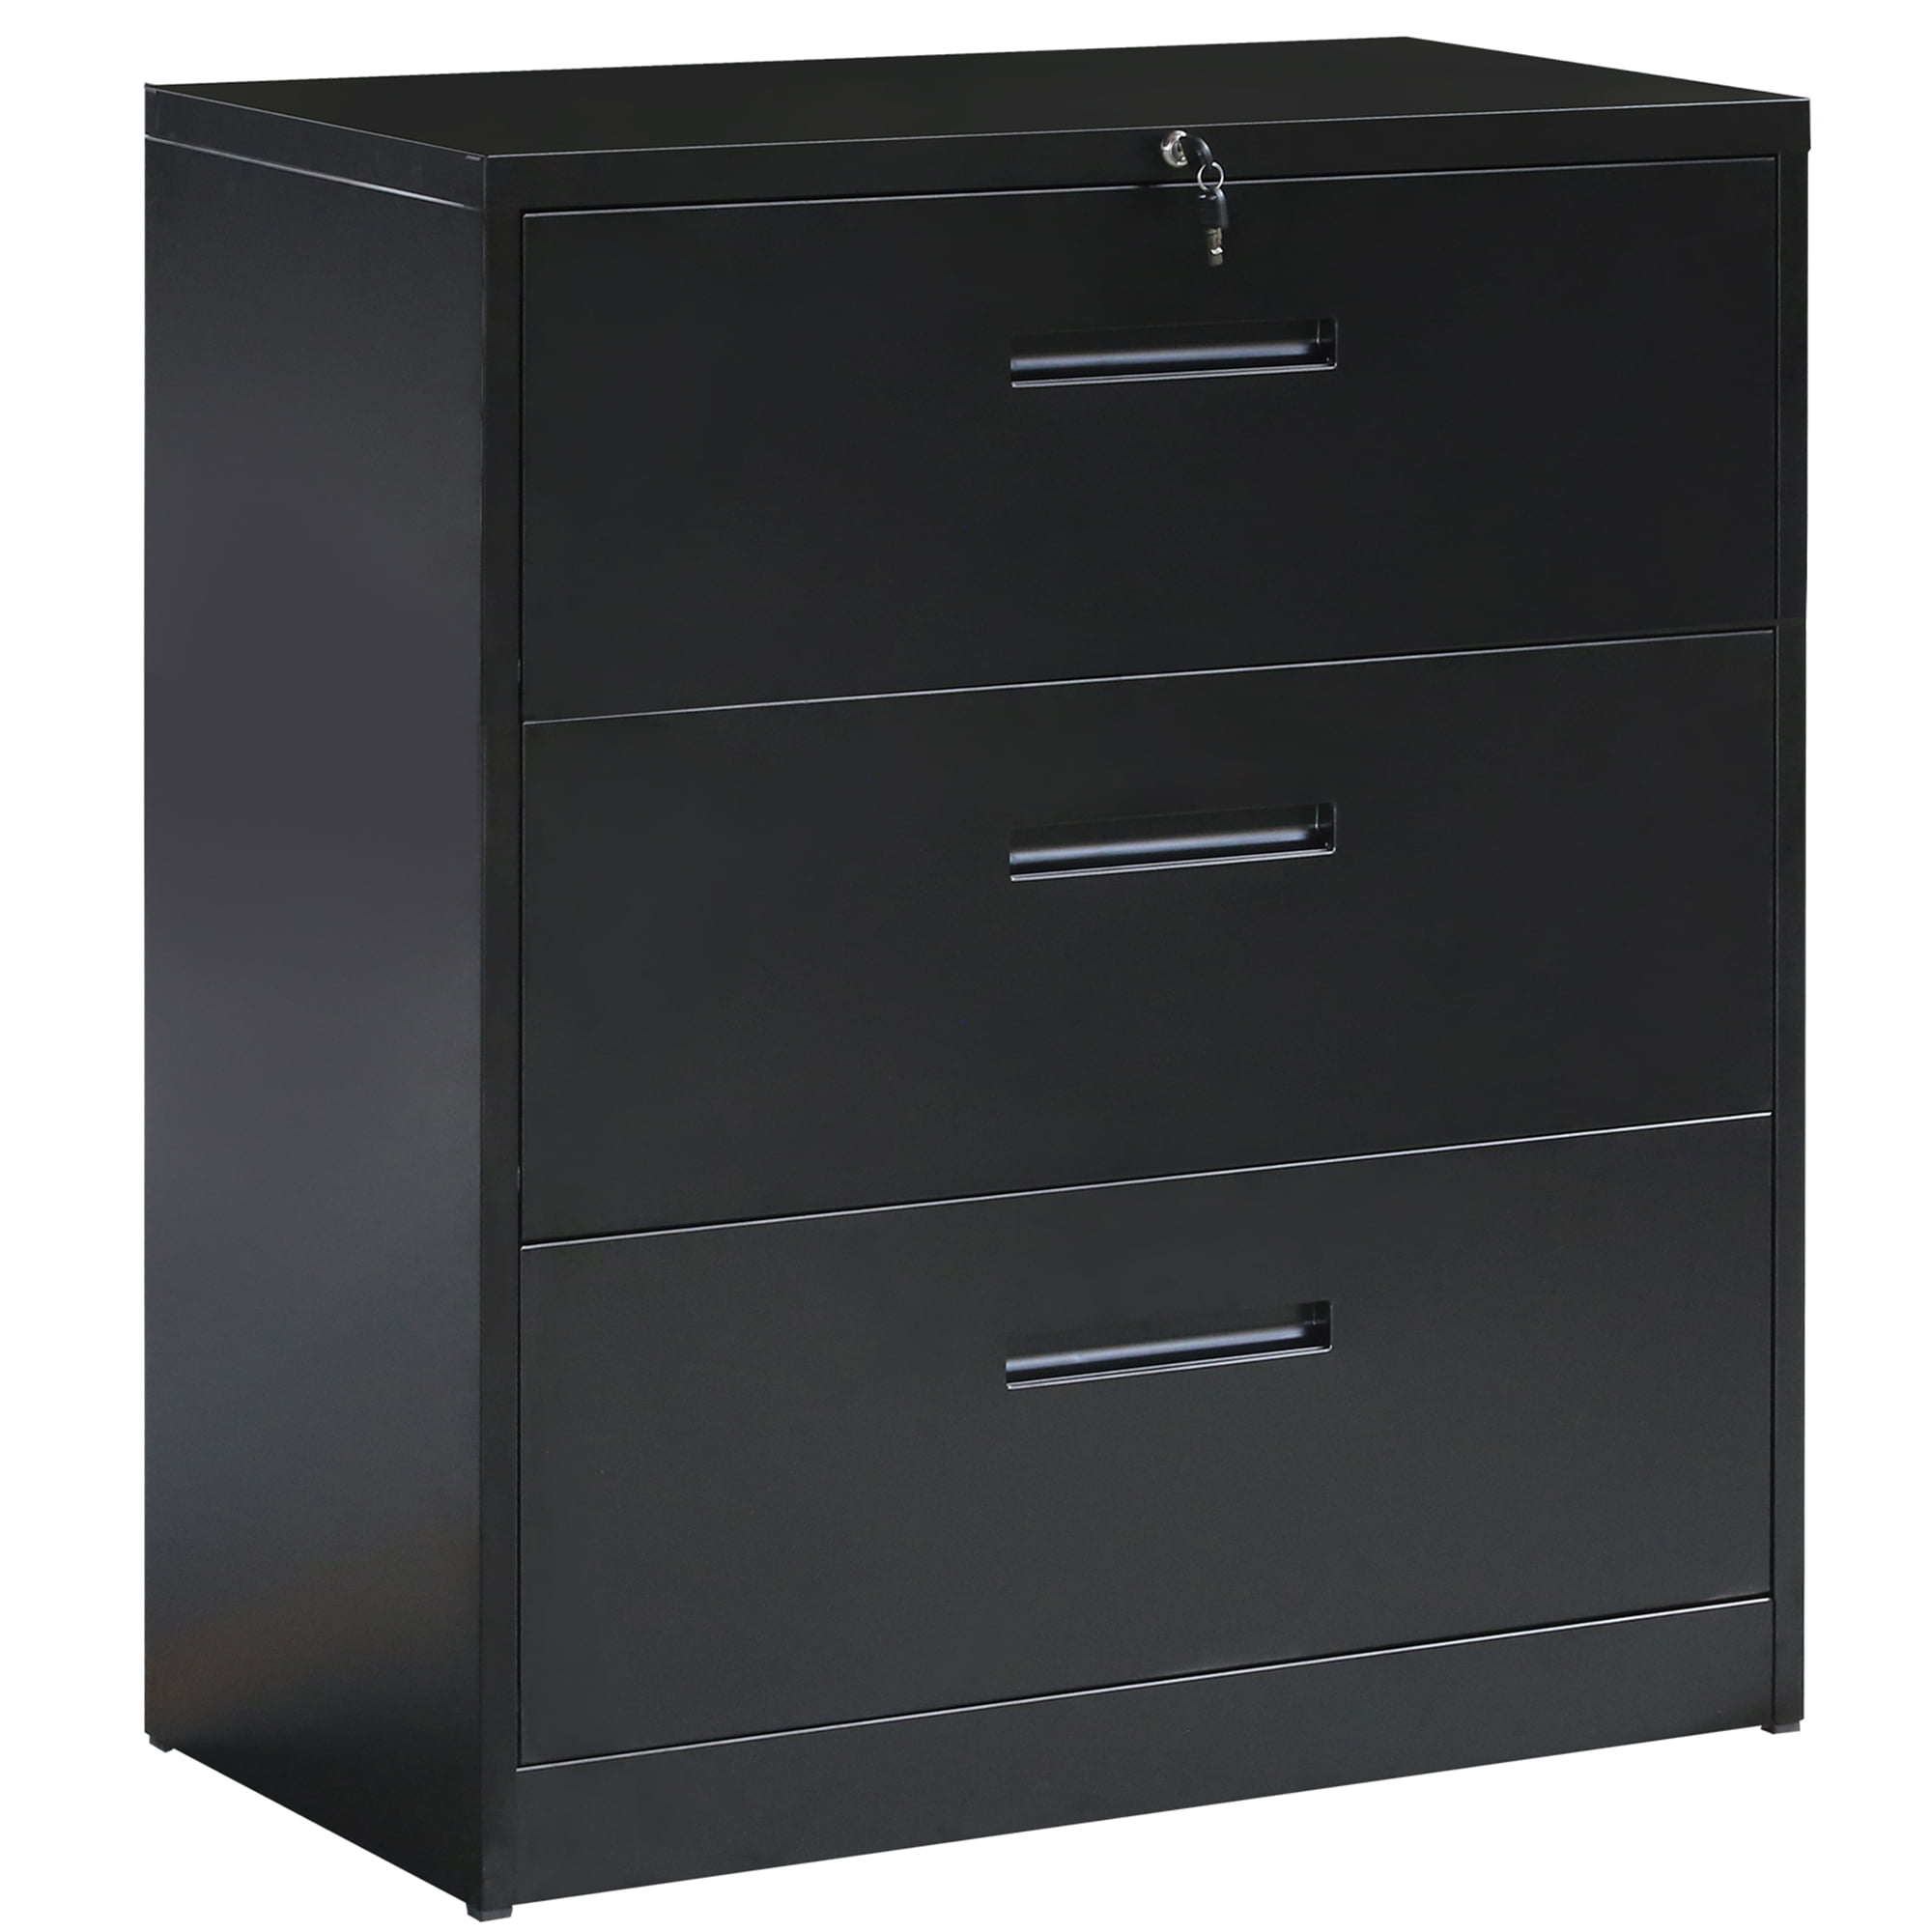 Clearance! 3 Drawer Filing Cabinet, Modern Filing Cabinets ...